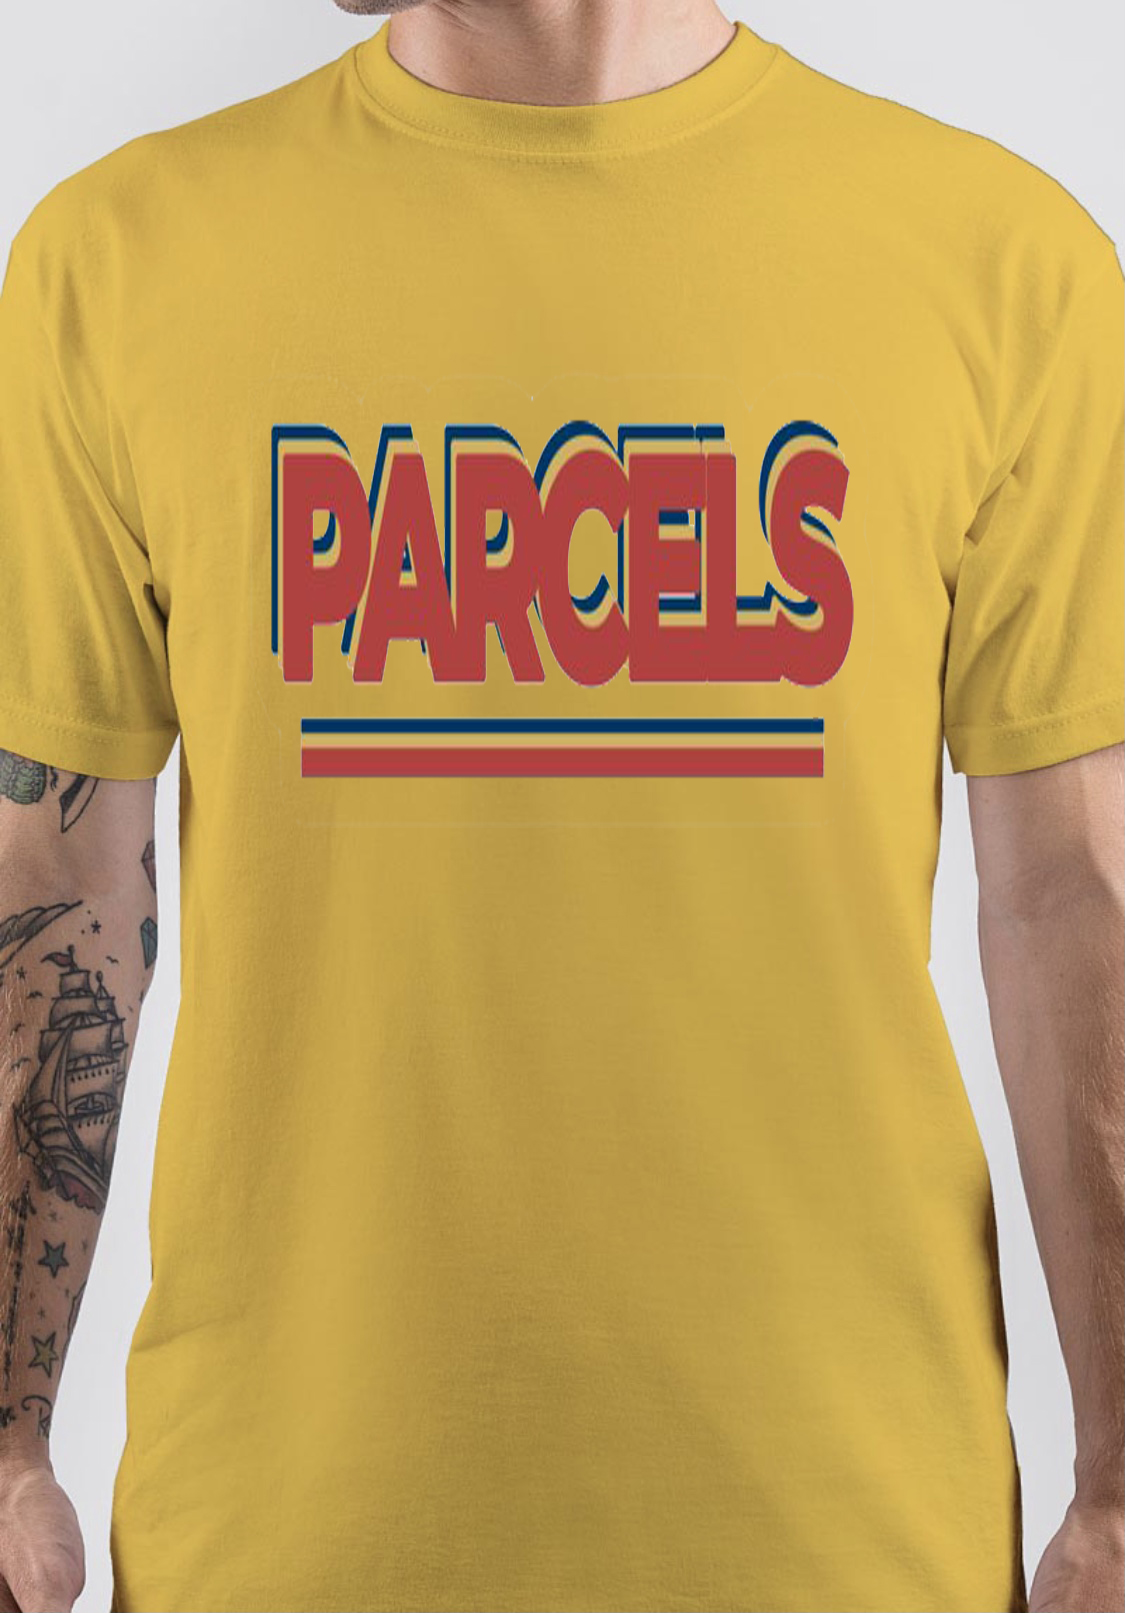 Parcels Band T-Shirt And Merchandise